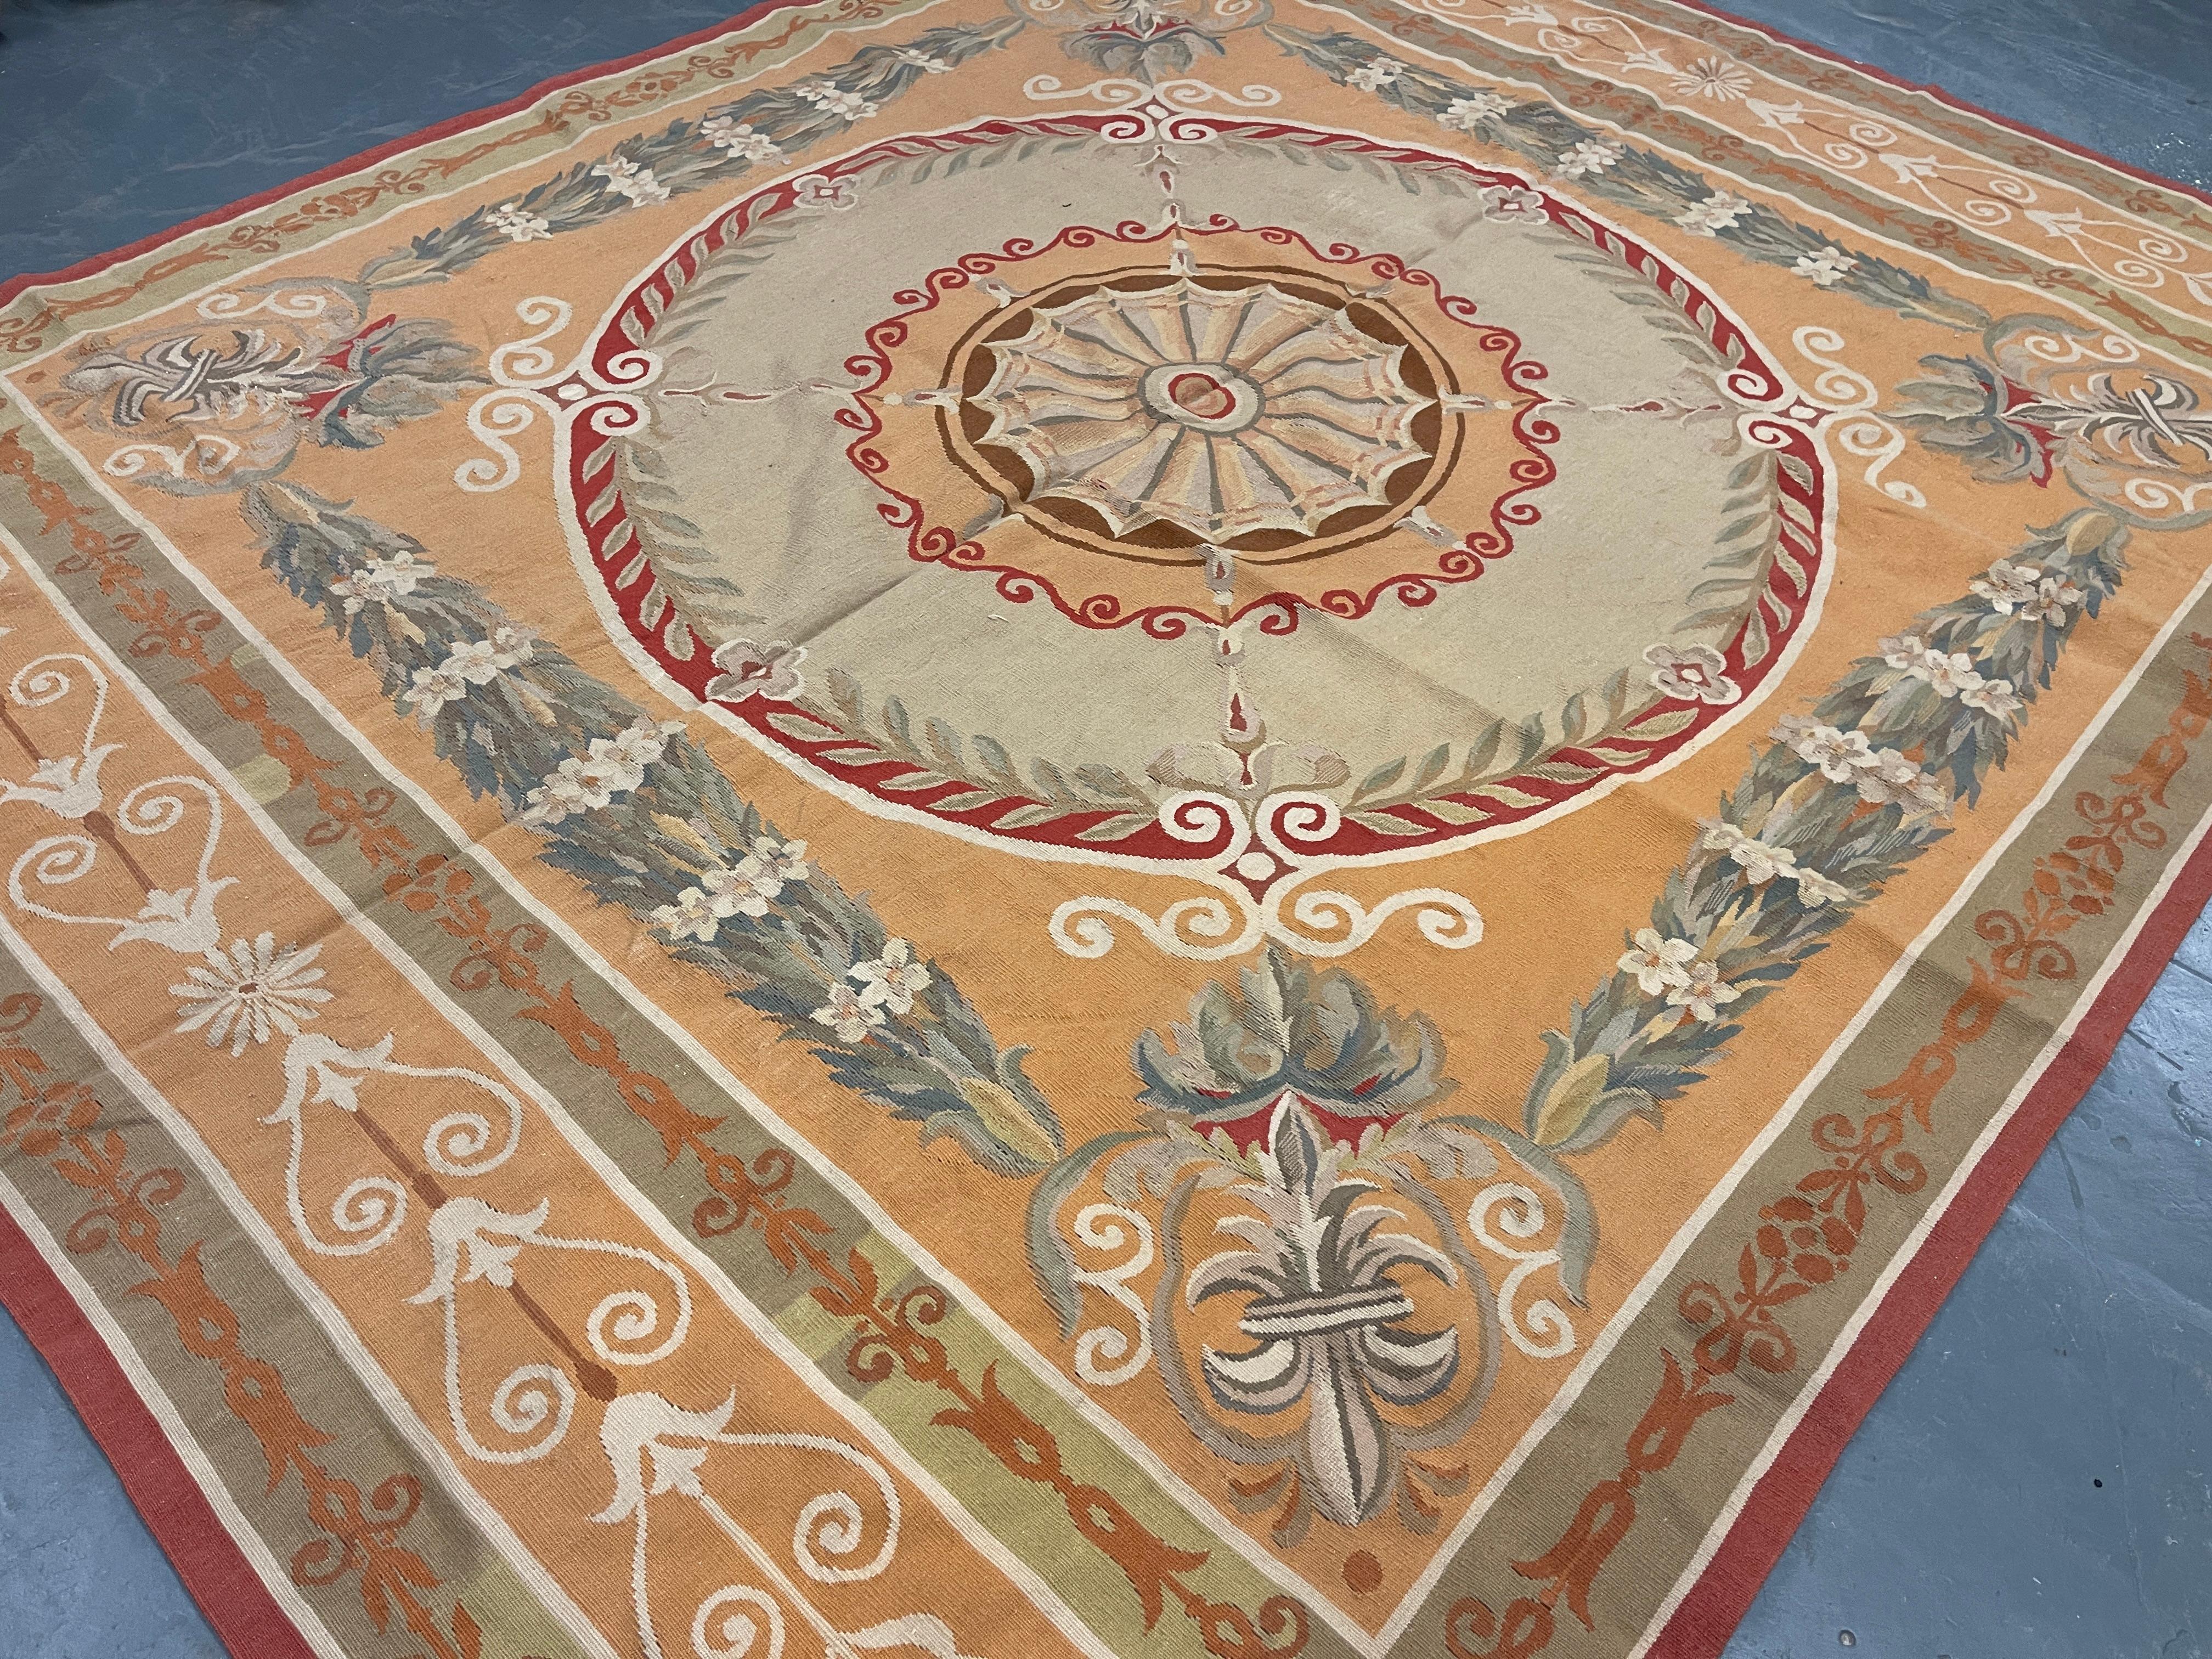 This fantastic area rug has been handwoven with a beautiful, symmetrical floral design woven on an ivory gold background with cream, green, red and ivory accents. This elegant piece's colour and design make it the perfect accent rug.
This style of